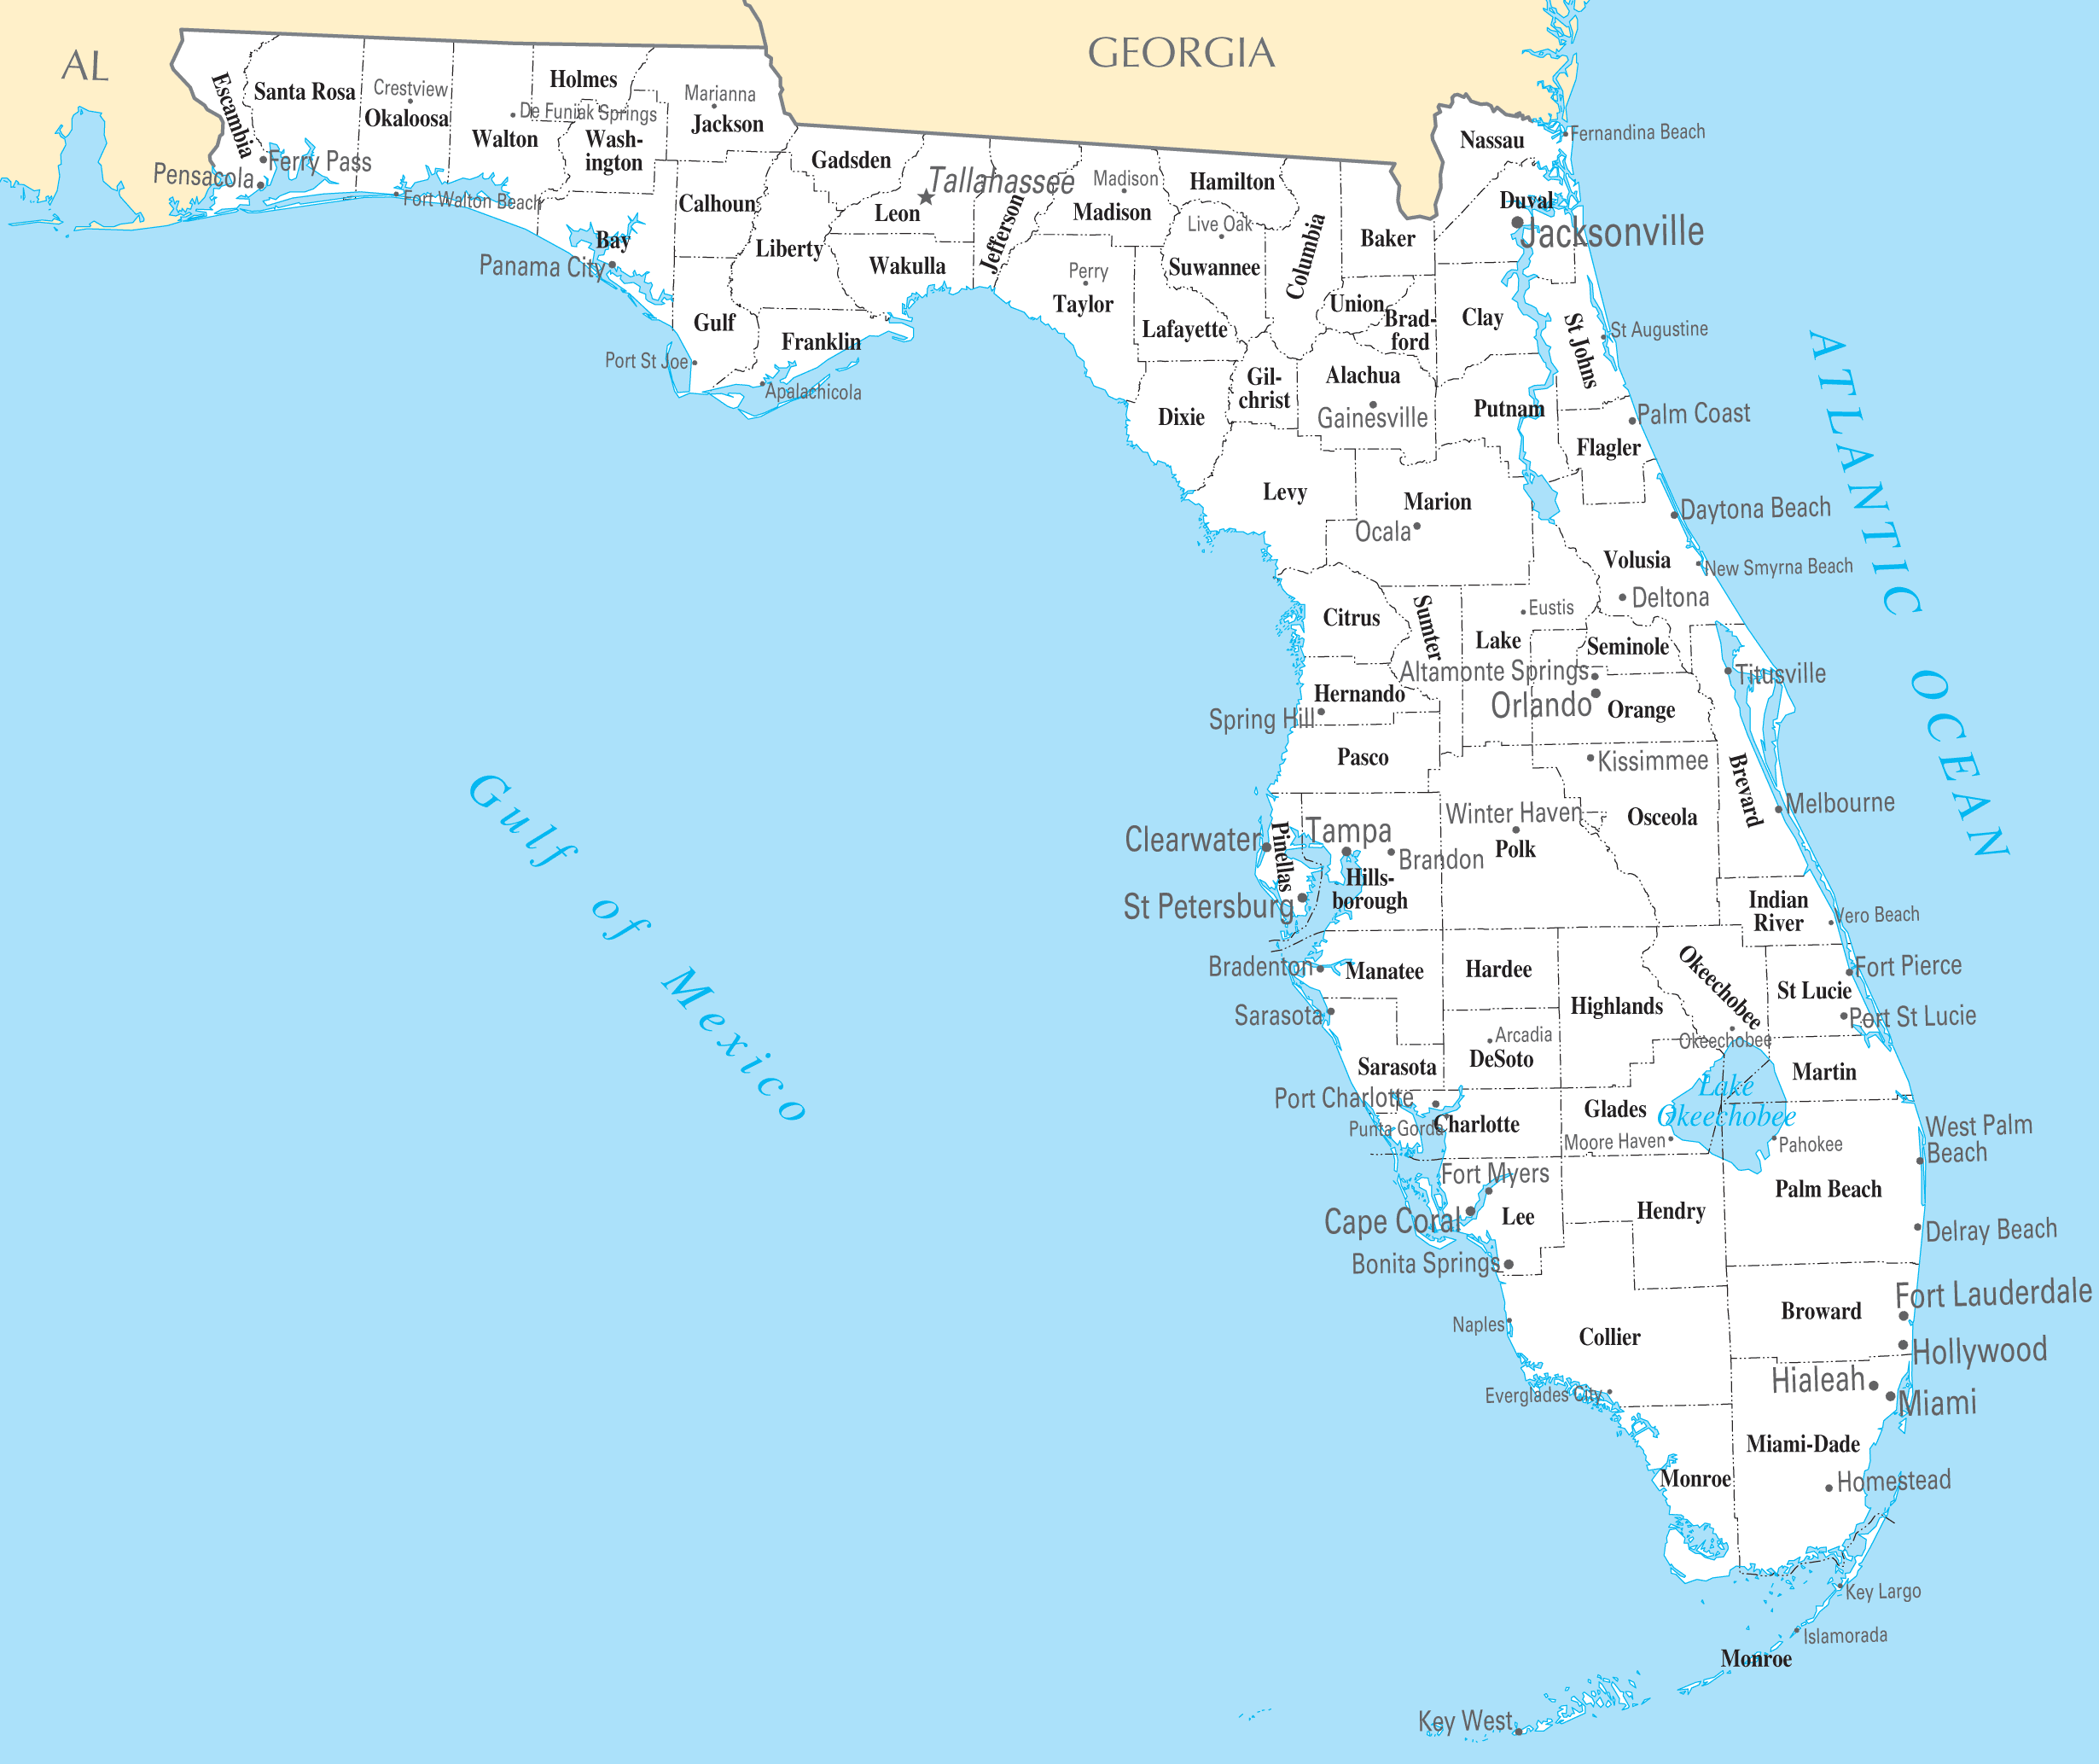 Florida Cities And Towns Mapsof